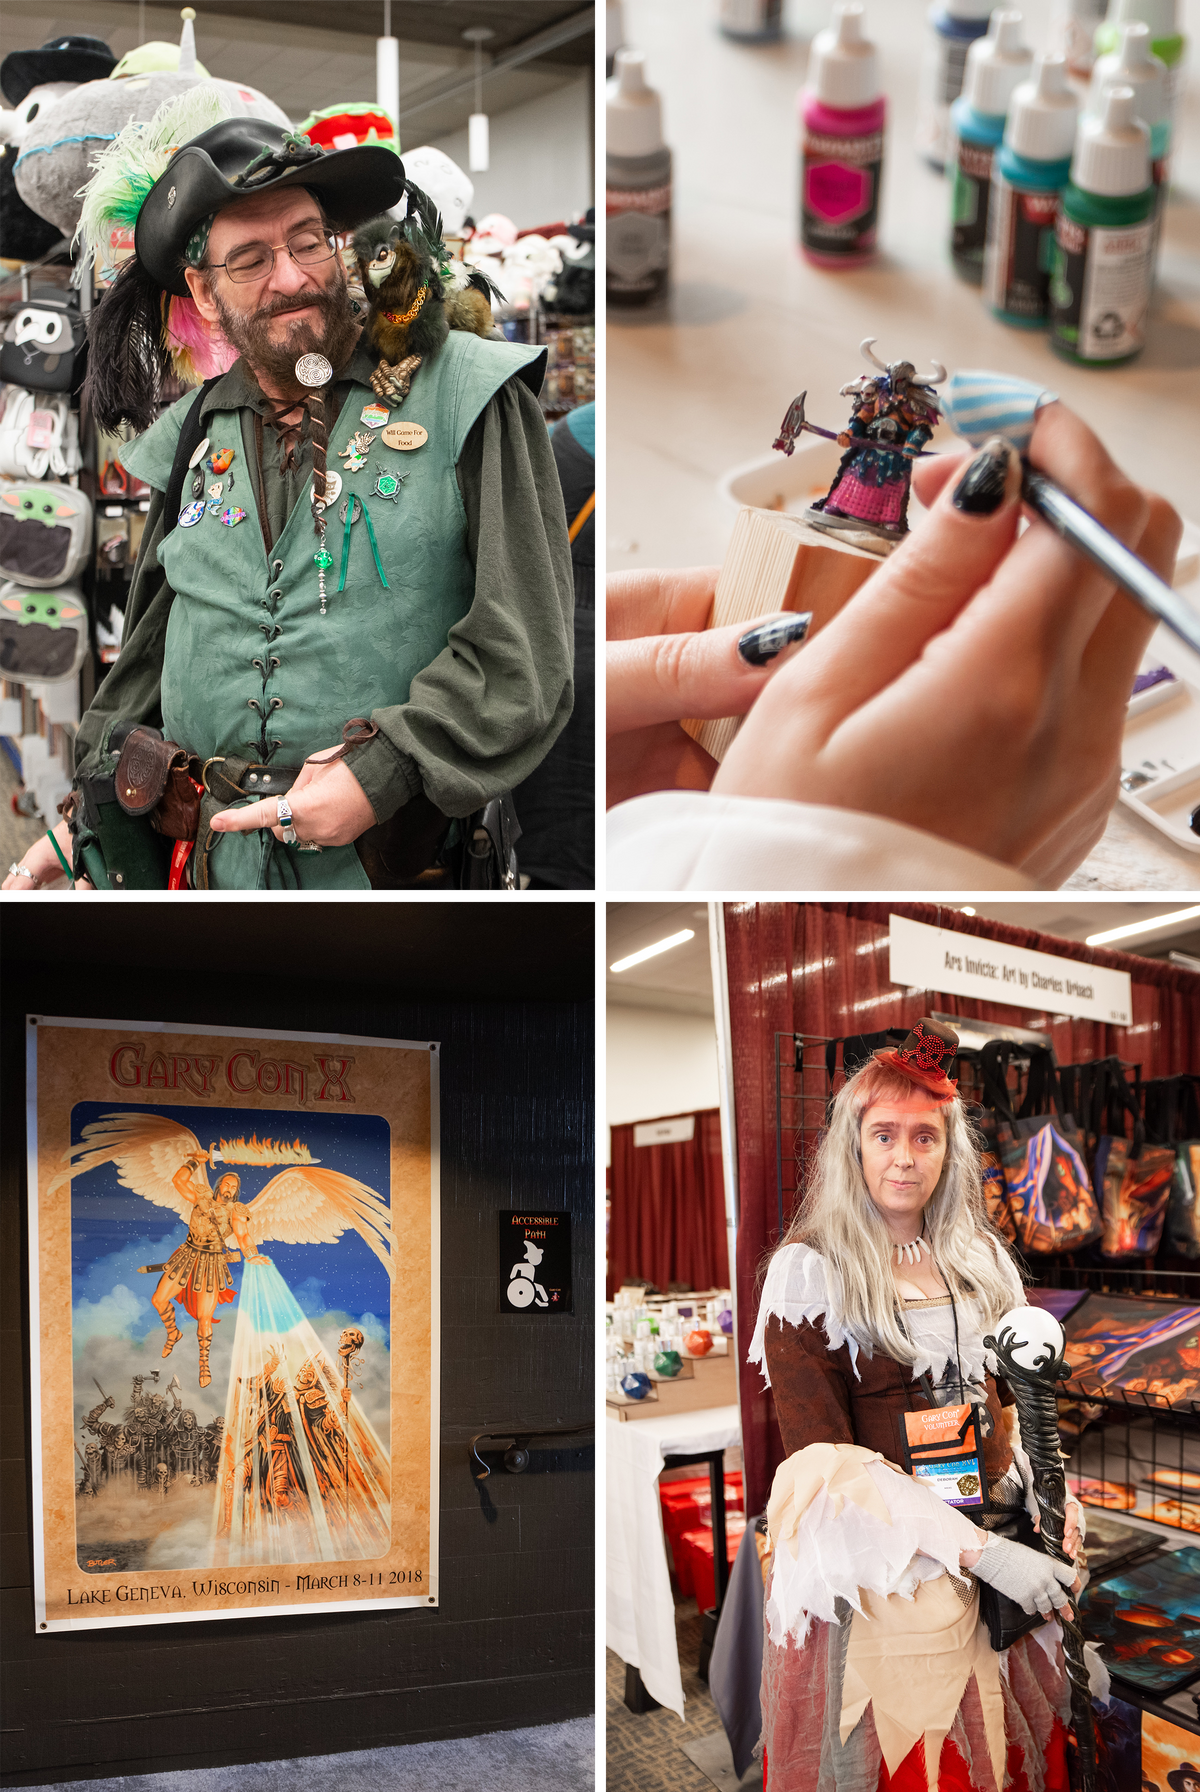 These photos capture some moments from the 2024 Gary Con, from costume-clad attendees to old Gary Con posters (bottom left) to tables where patrons could paint and design their very own miniatures (top right).